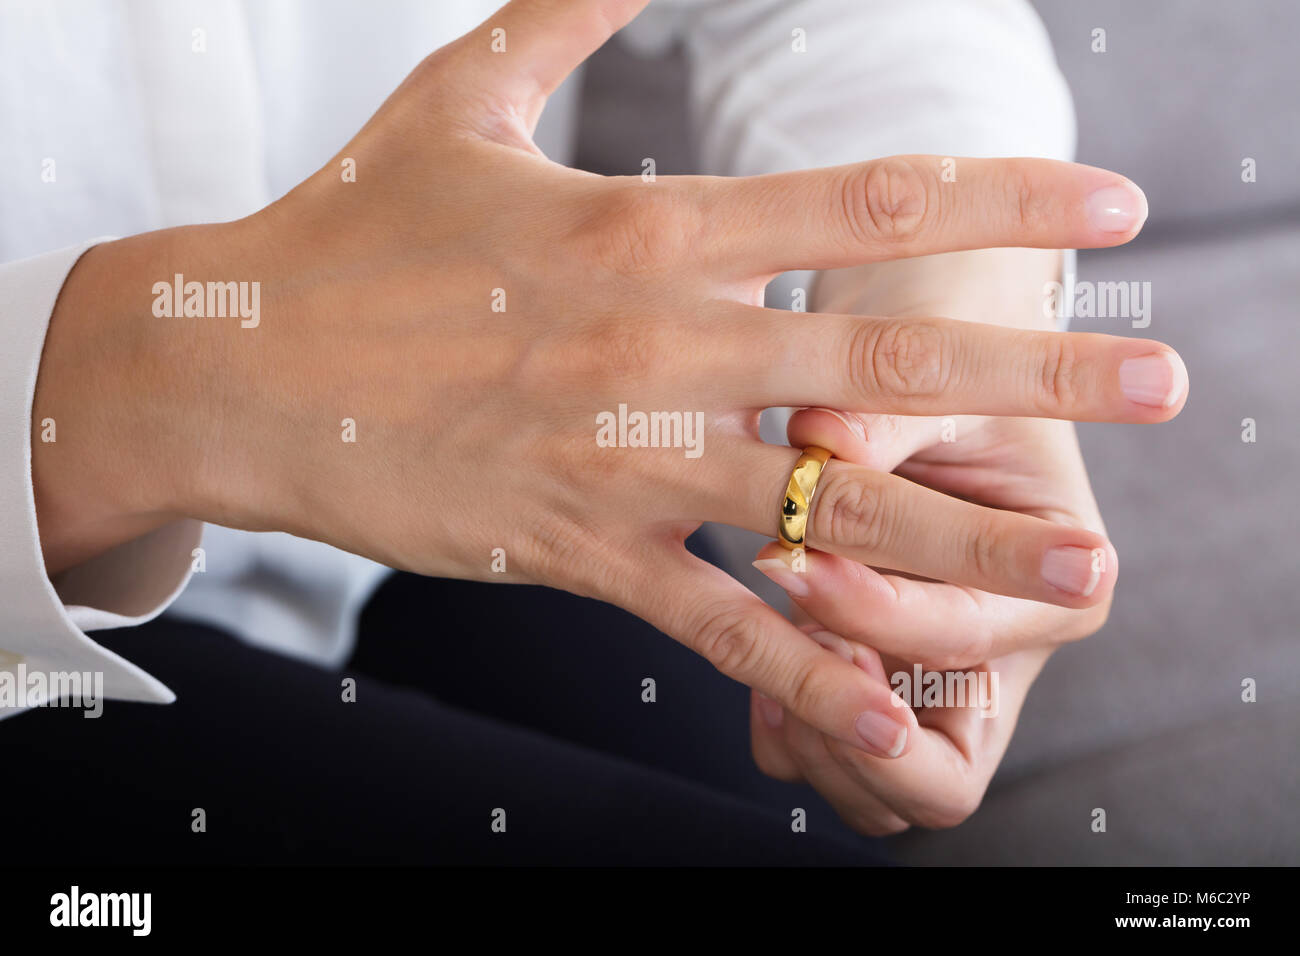 Closeup The Wedding Beauty Diamond Ring On Women Ring Finger Stock Photo,  Picture and Royalty Free Image. Image 97191534.